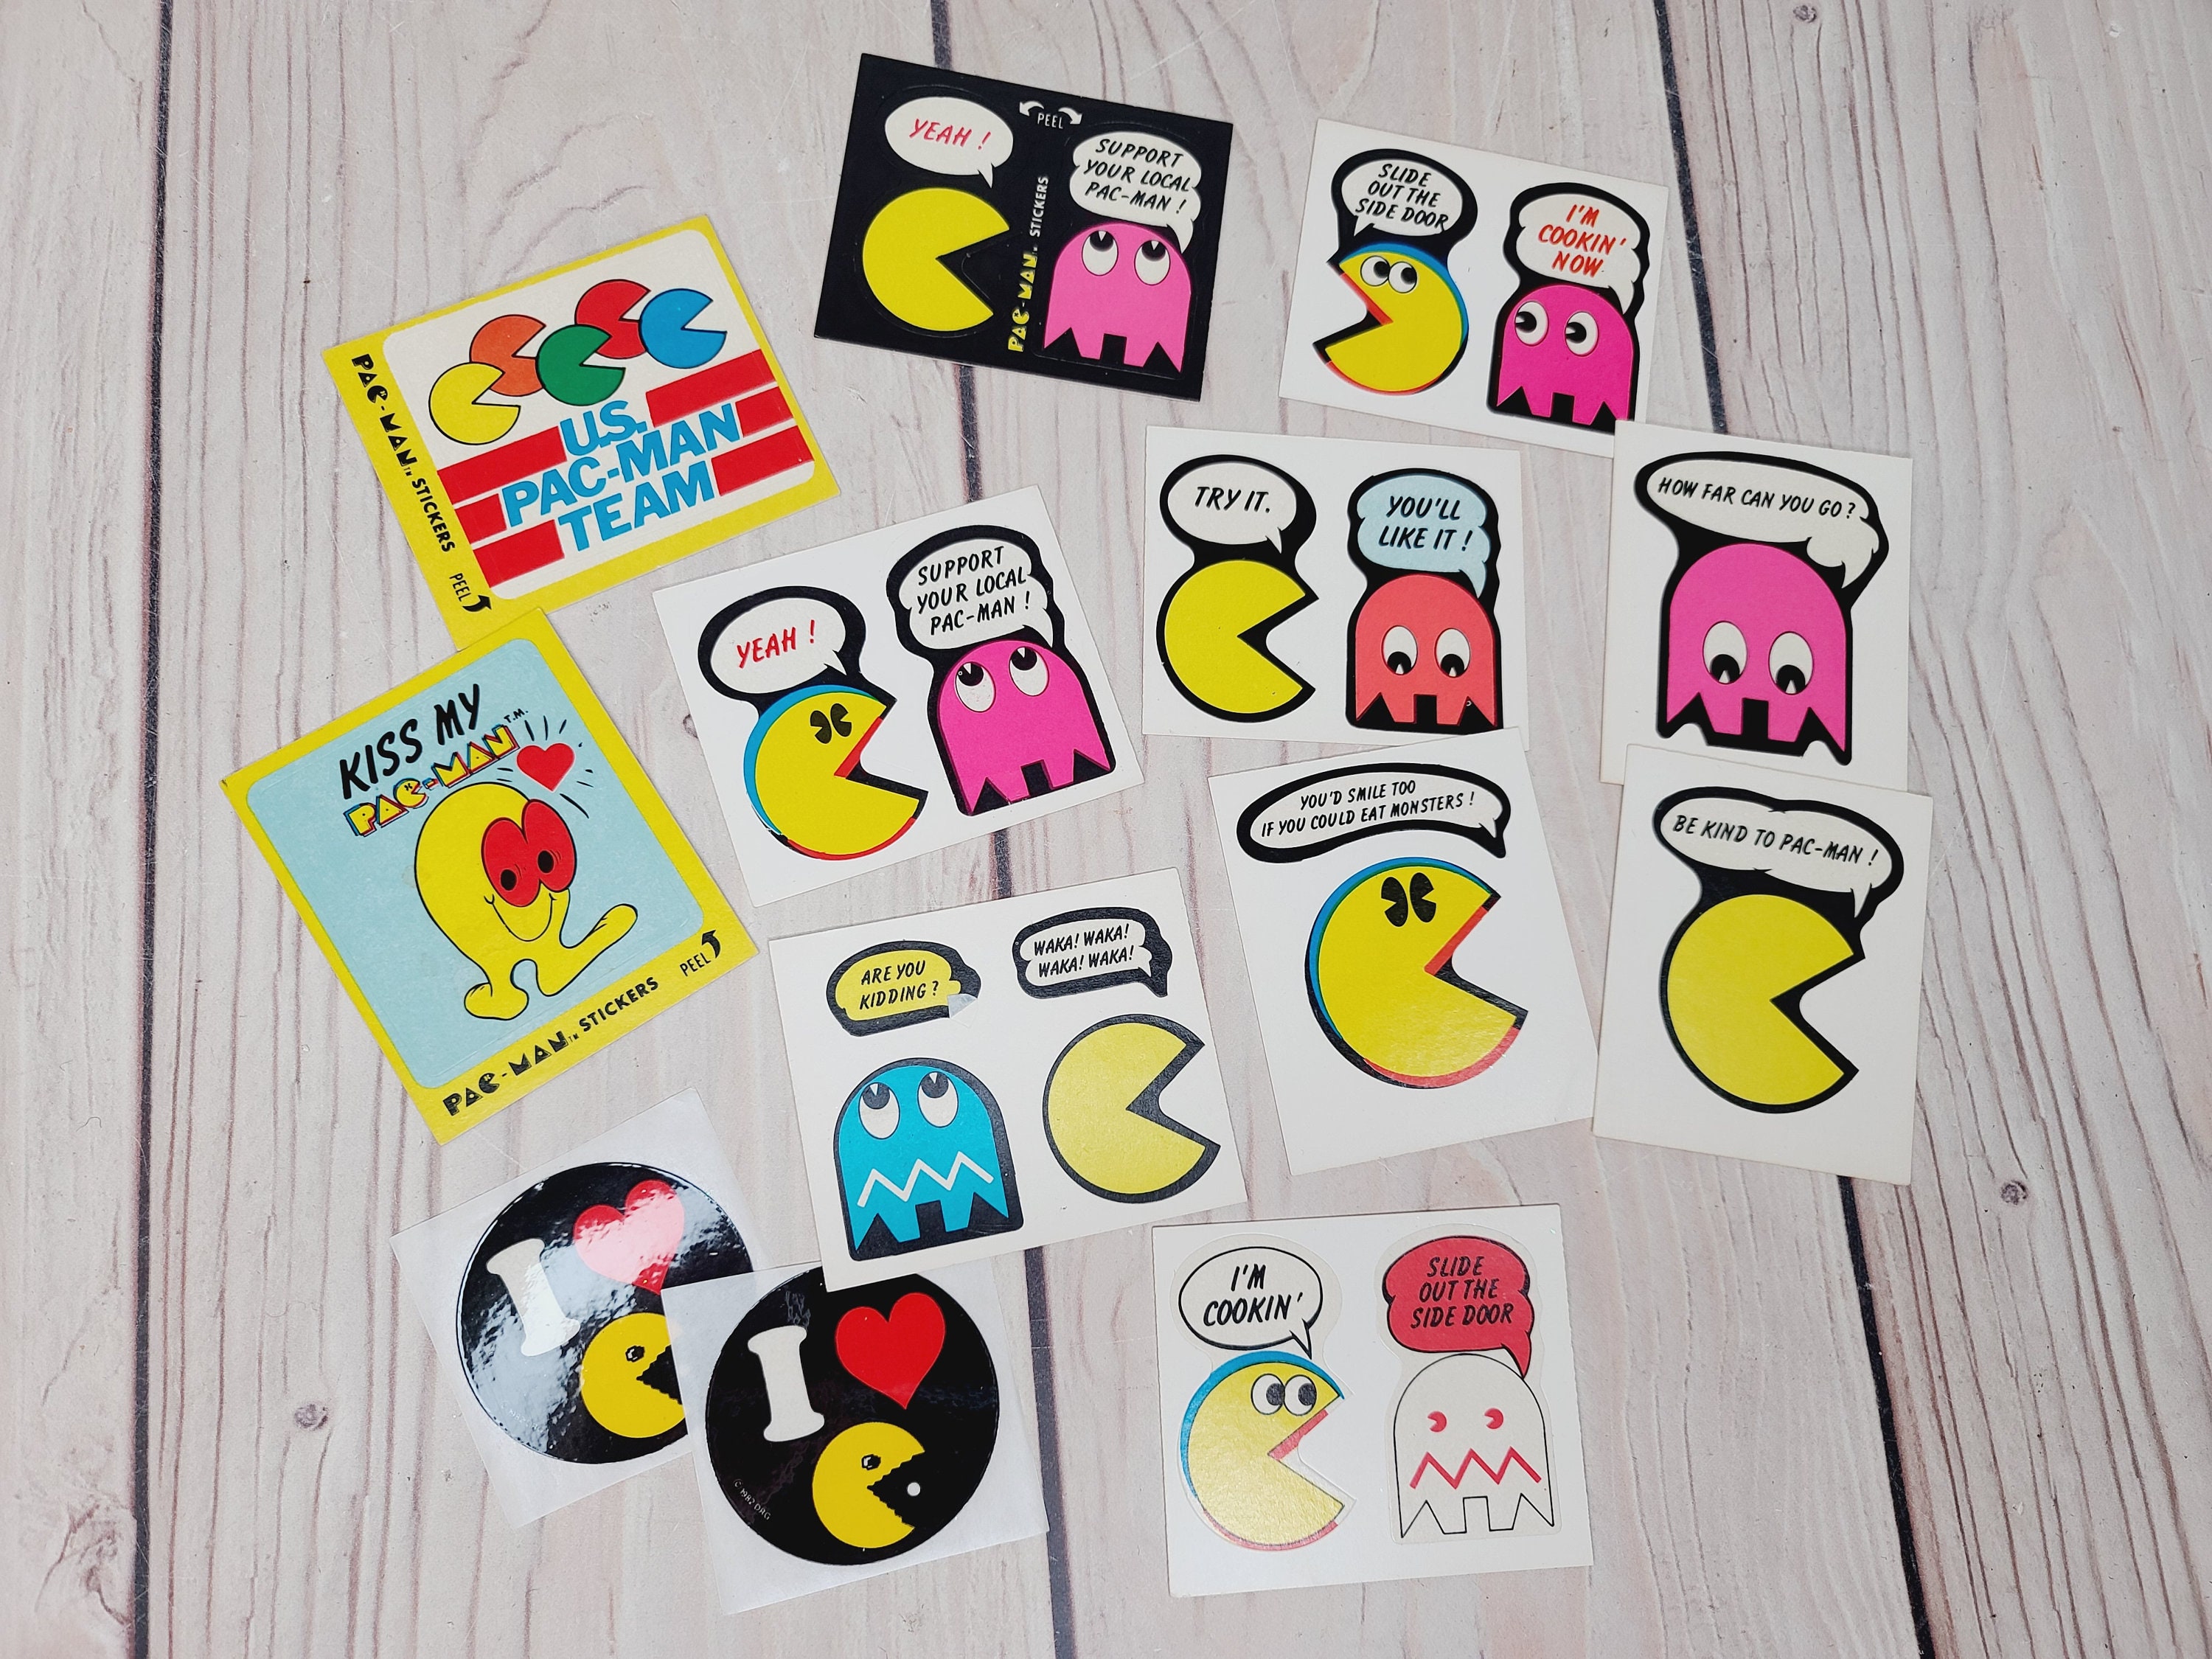 1980 PAC-MAN Puffy Stickers With Moving Eyes Vintage 80s Pac Man